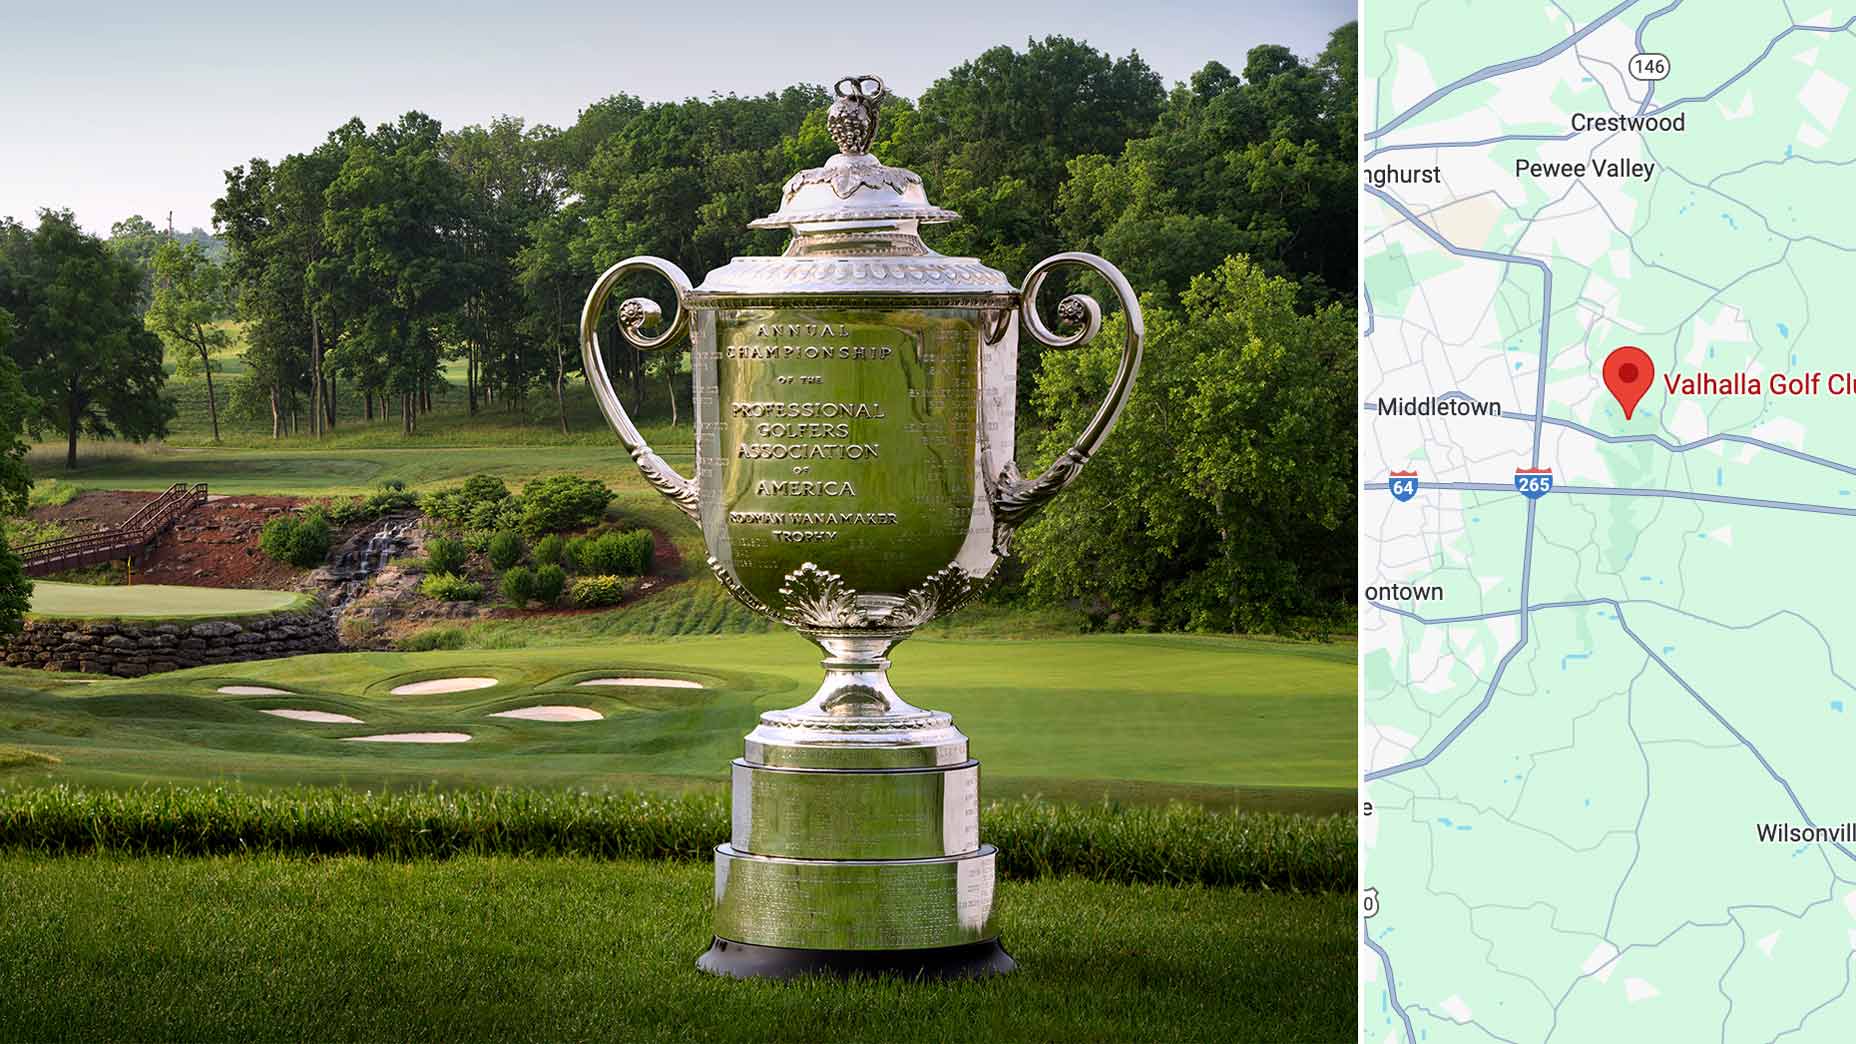 A split image of the PGA Championship trophy and Valhalla's location.